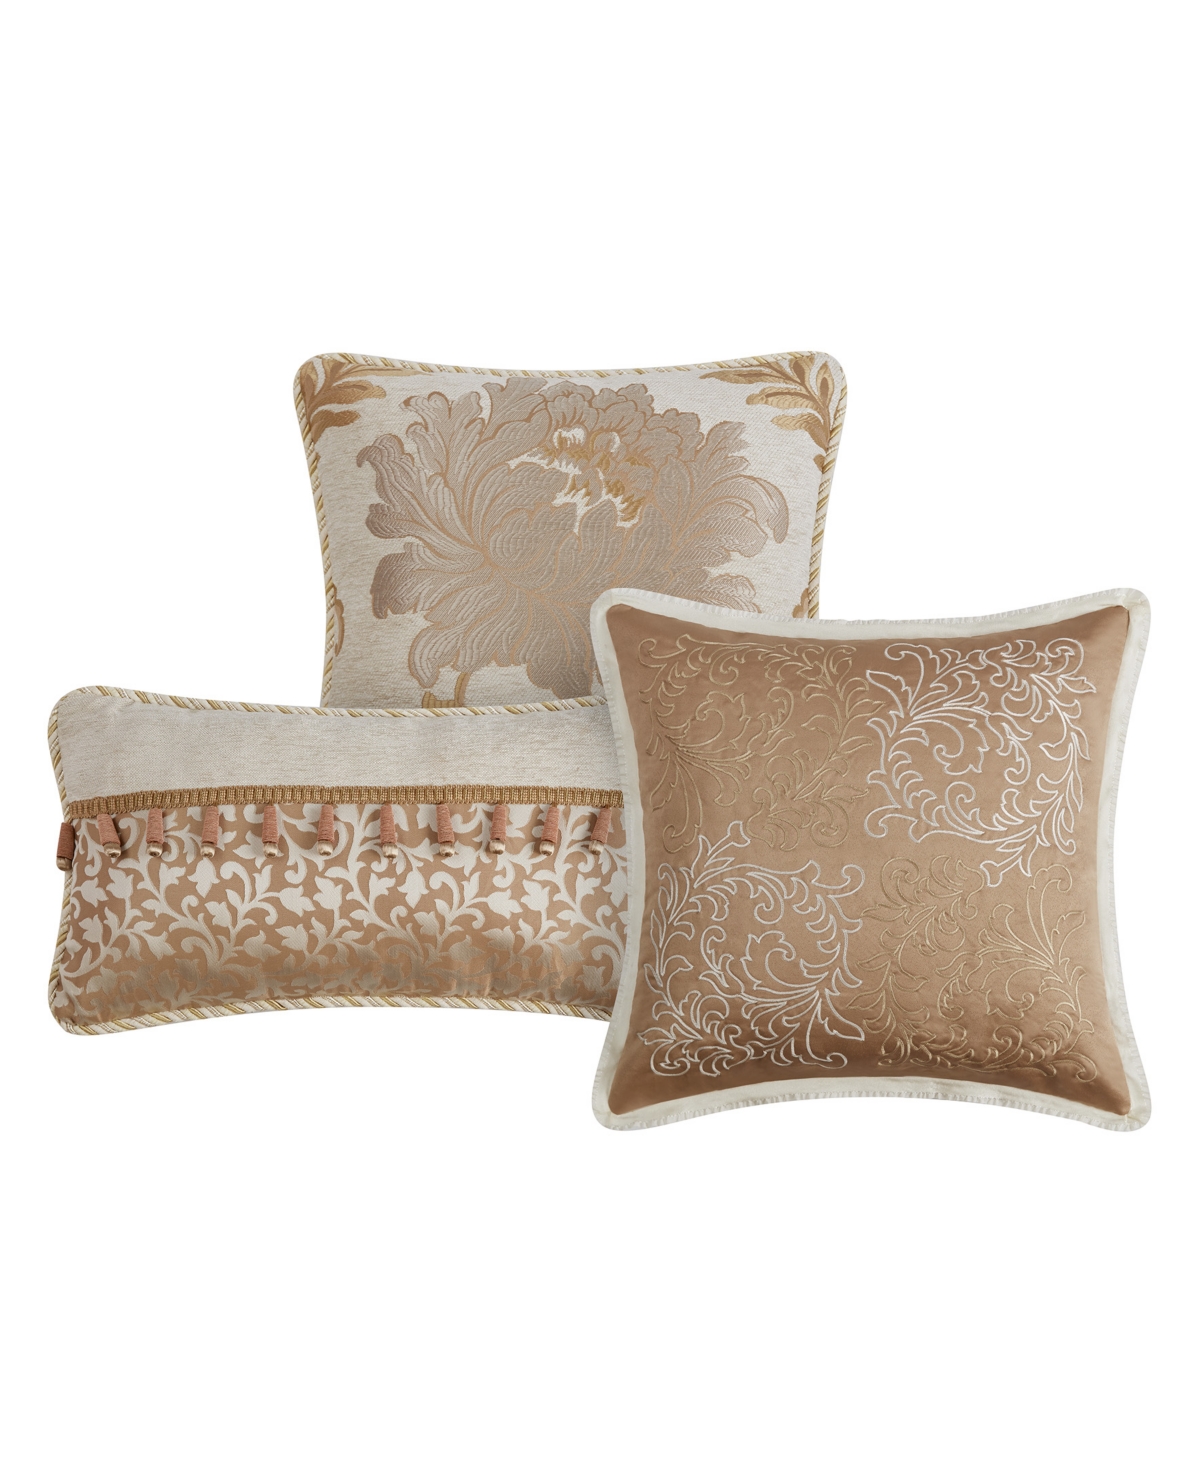 WATERFORD ANSONIA DECORATIVE PILLOWS SET OF 3 BEDDING